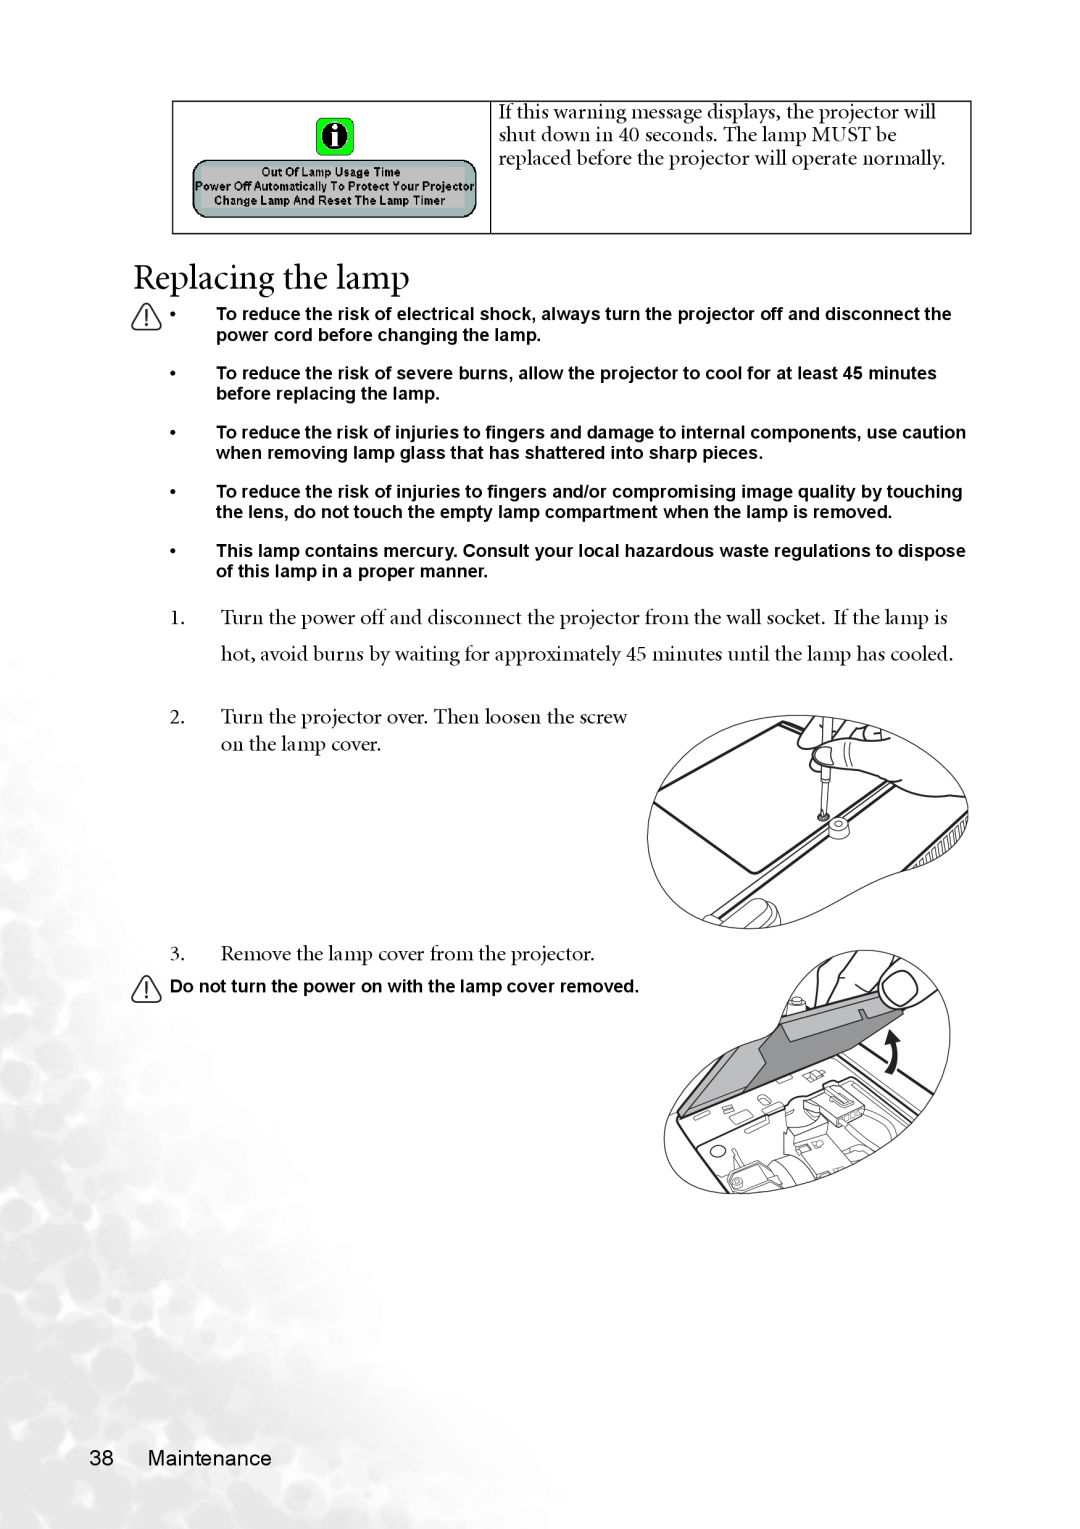 BenQ MP620p user manual Replacing the lamp, Turn the projector over. Then loosen the screw on the lamp cover, Maintenance 